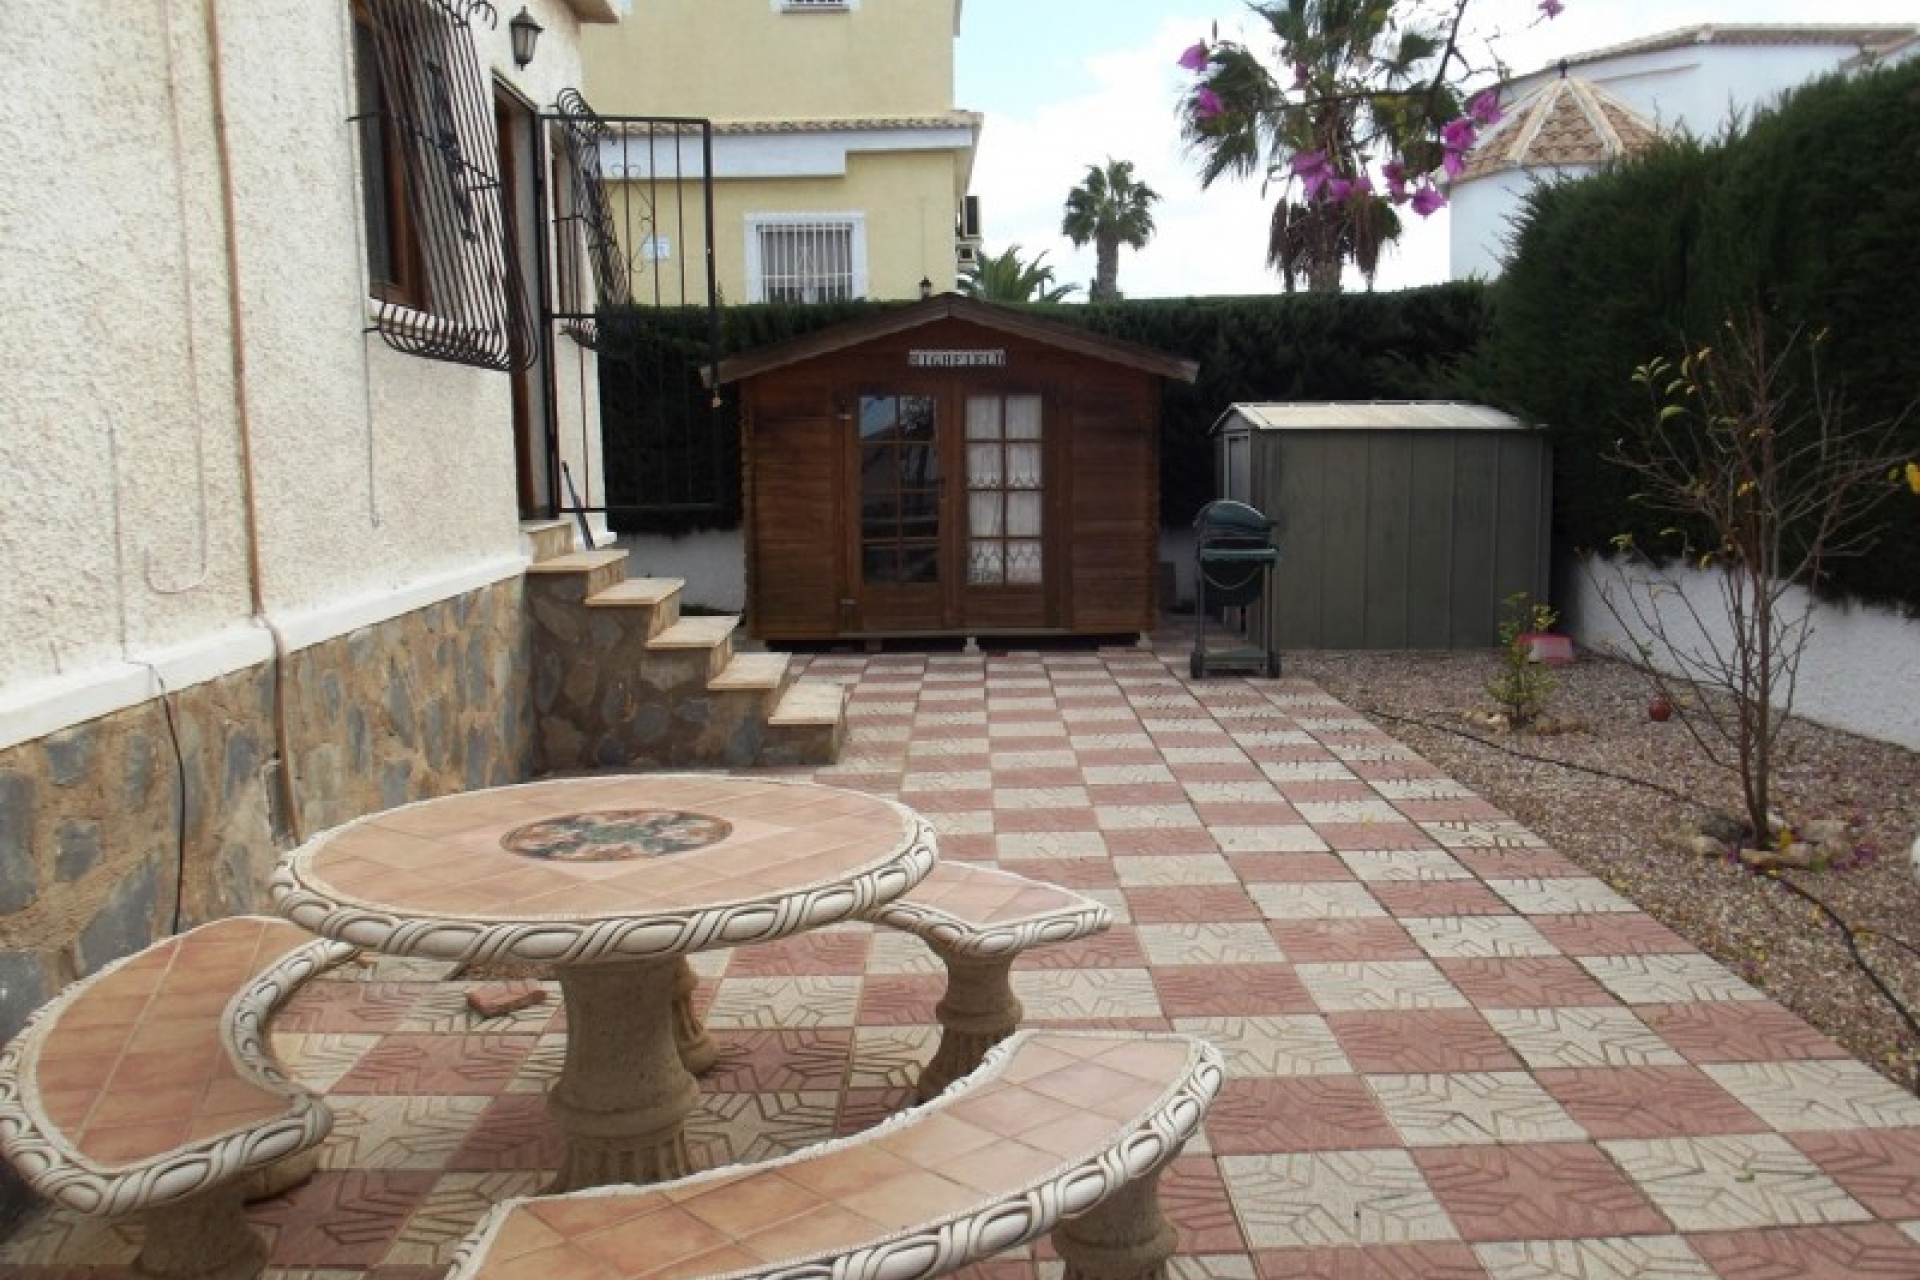 San Luis, close to Torrevieja and La Siesta Villa for sale, cheap, bargain property for sale on Spains Costa Blanca cheap.